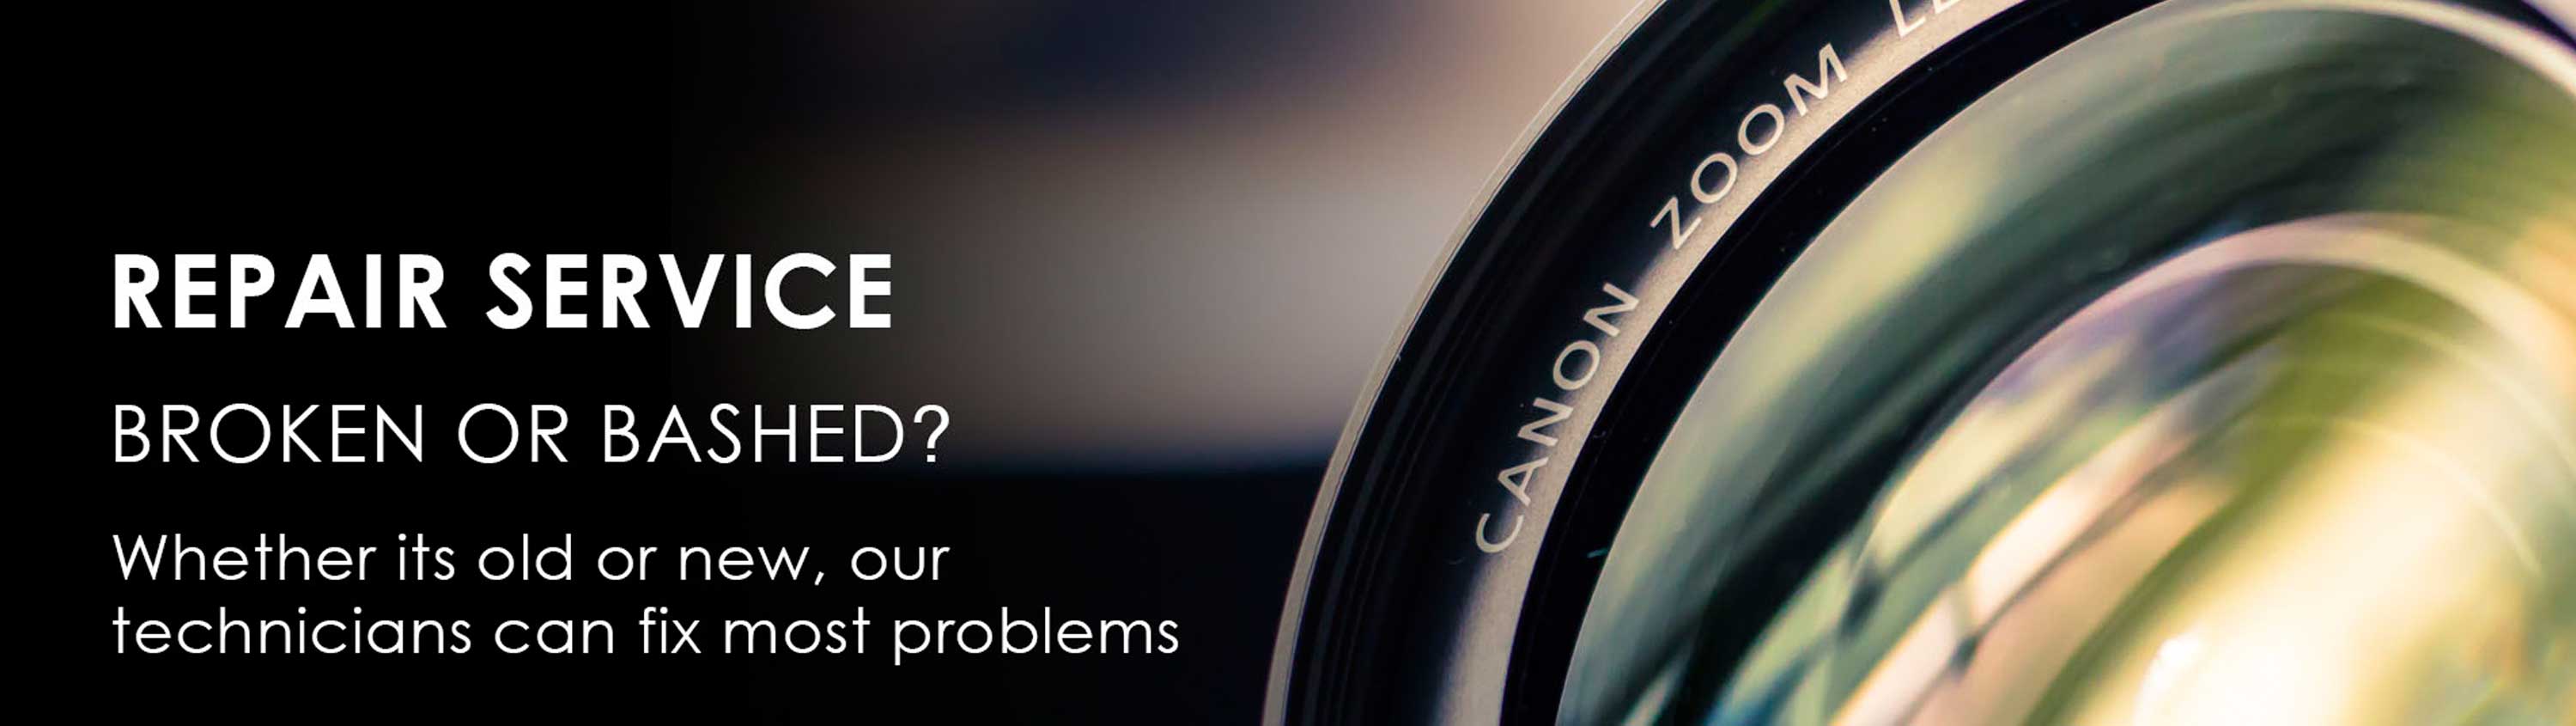 Camera repair Service. Broken or bashed? Whether its old or new, our technicians can fix mist problems.